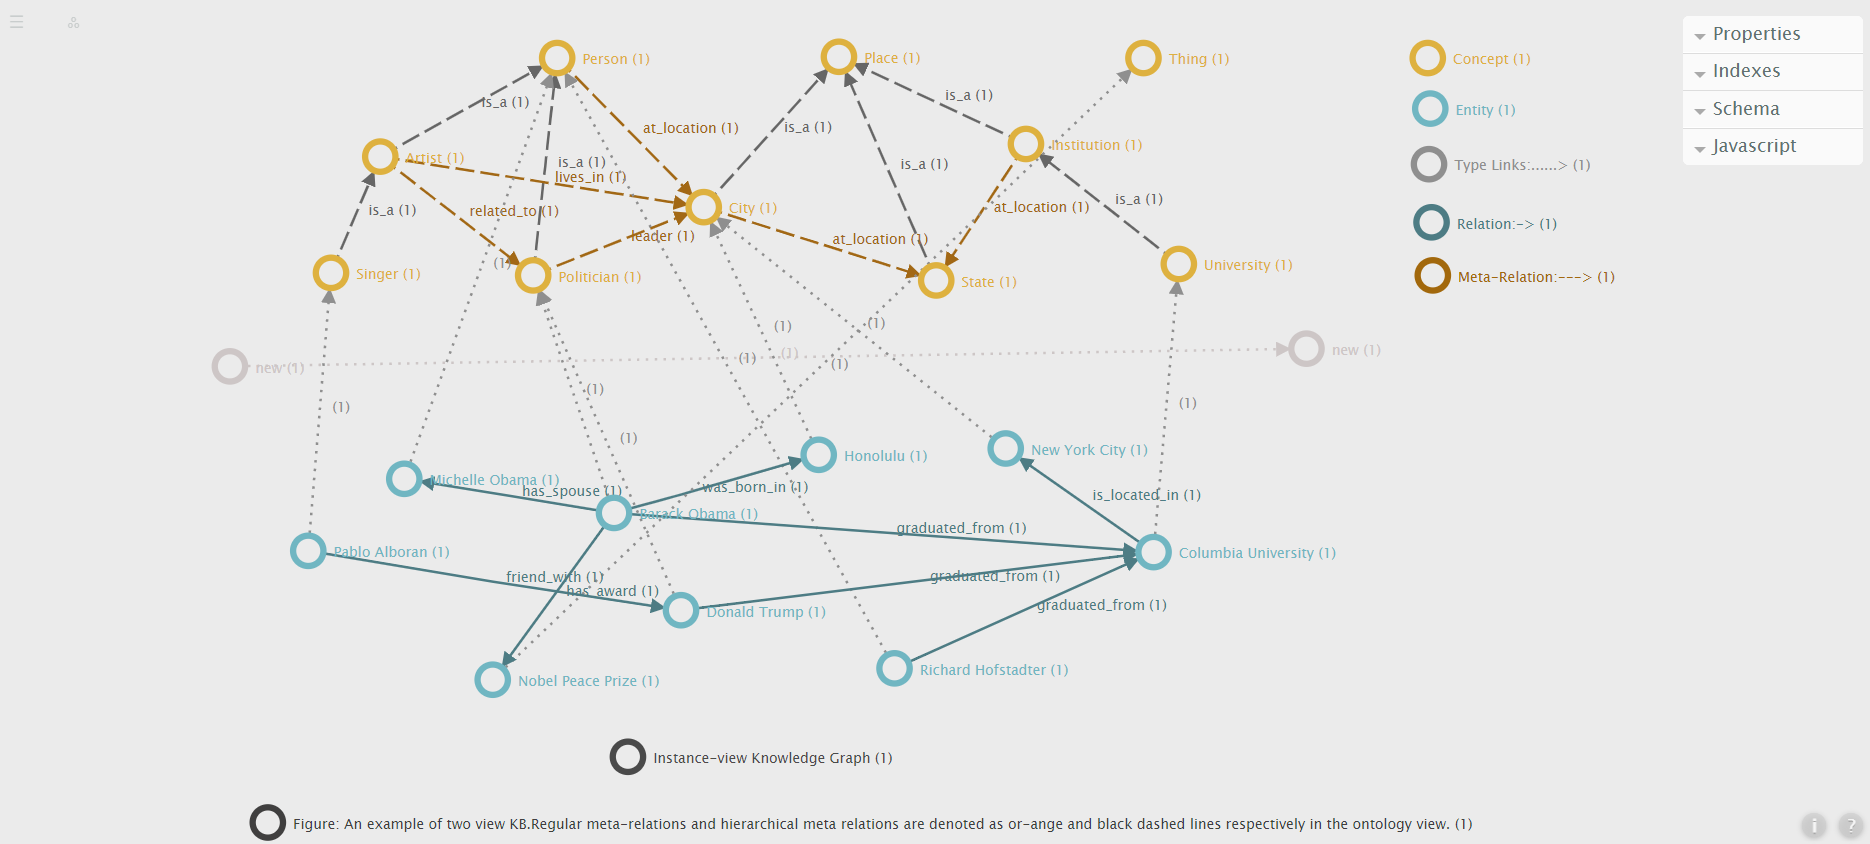 Instance-view Knowledge Graph